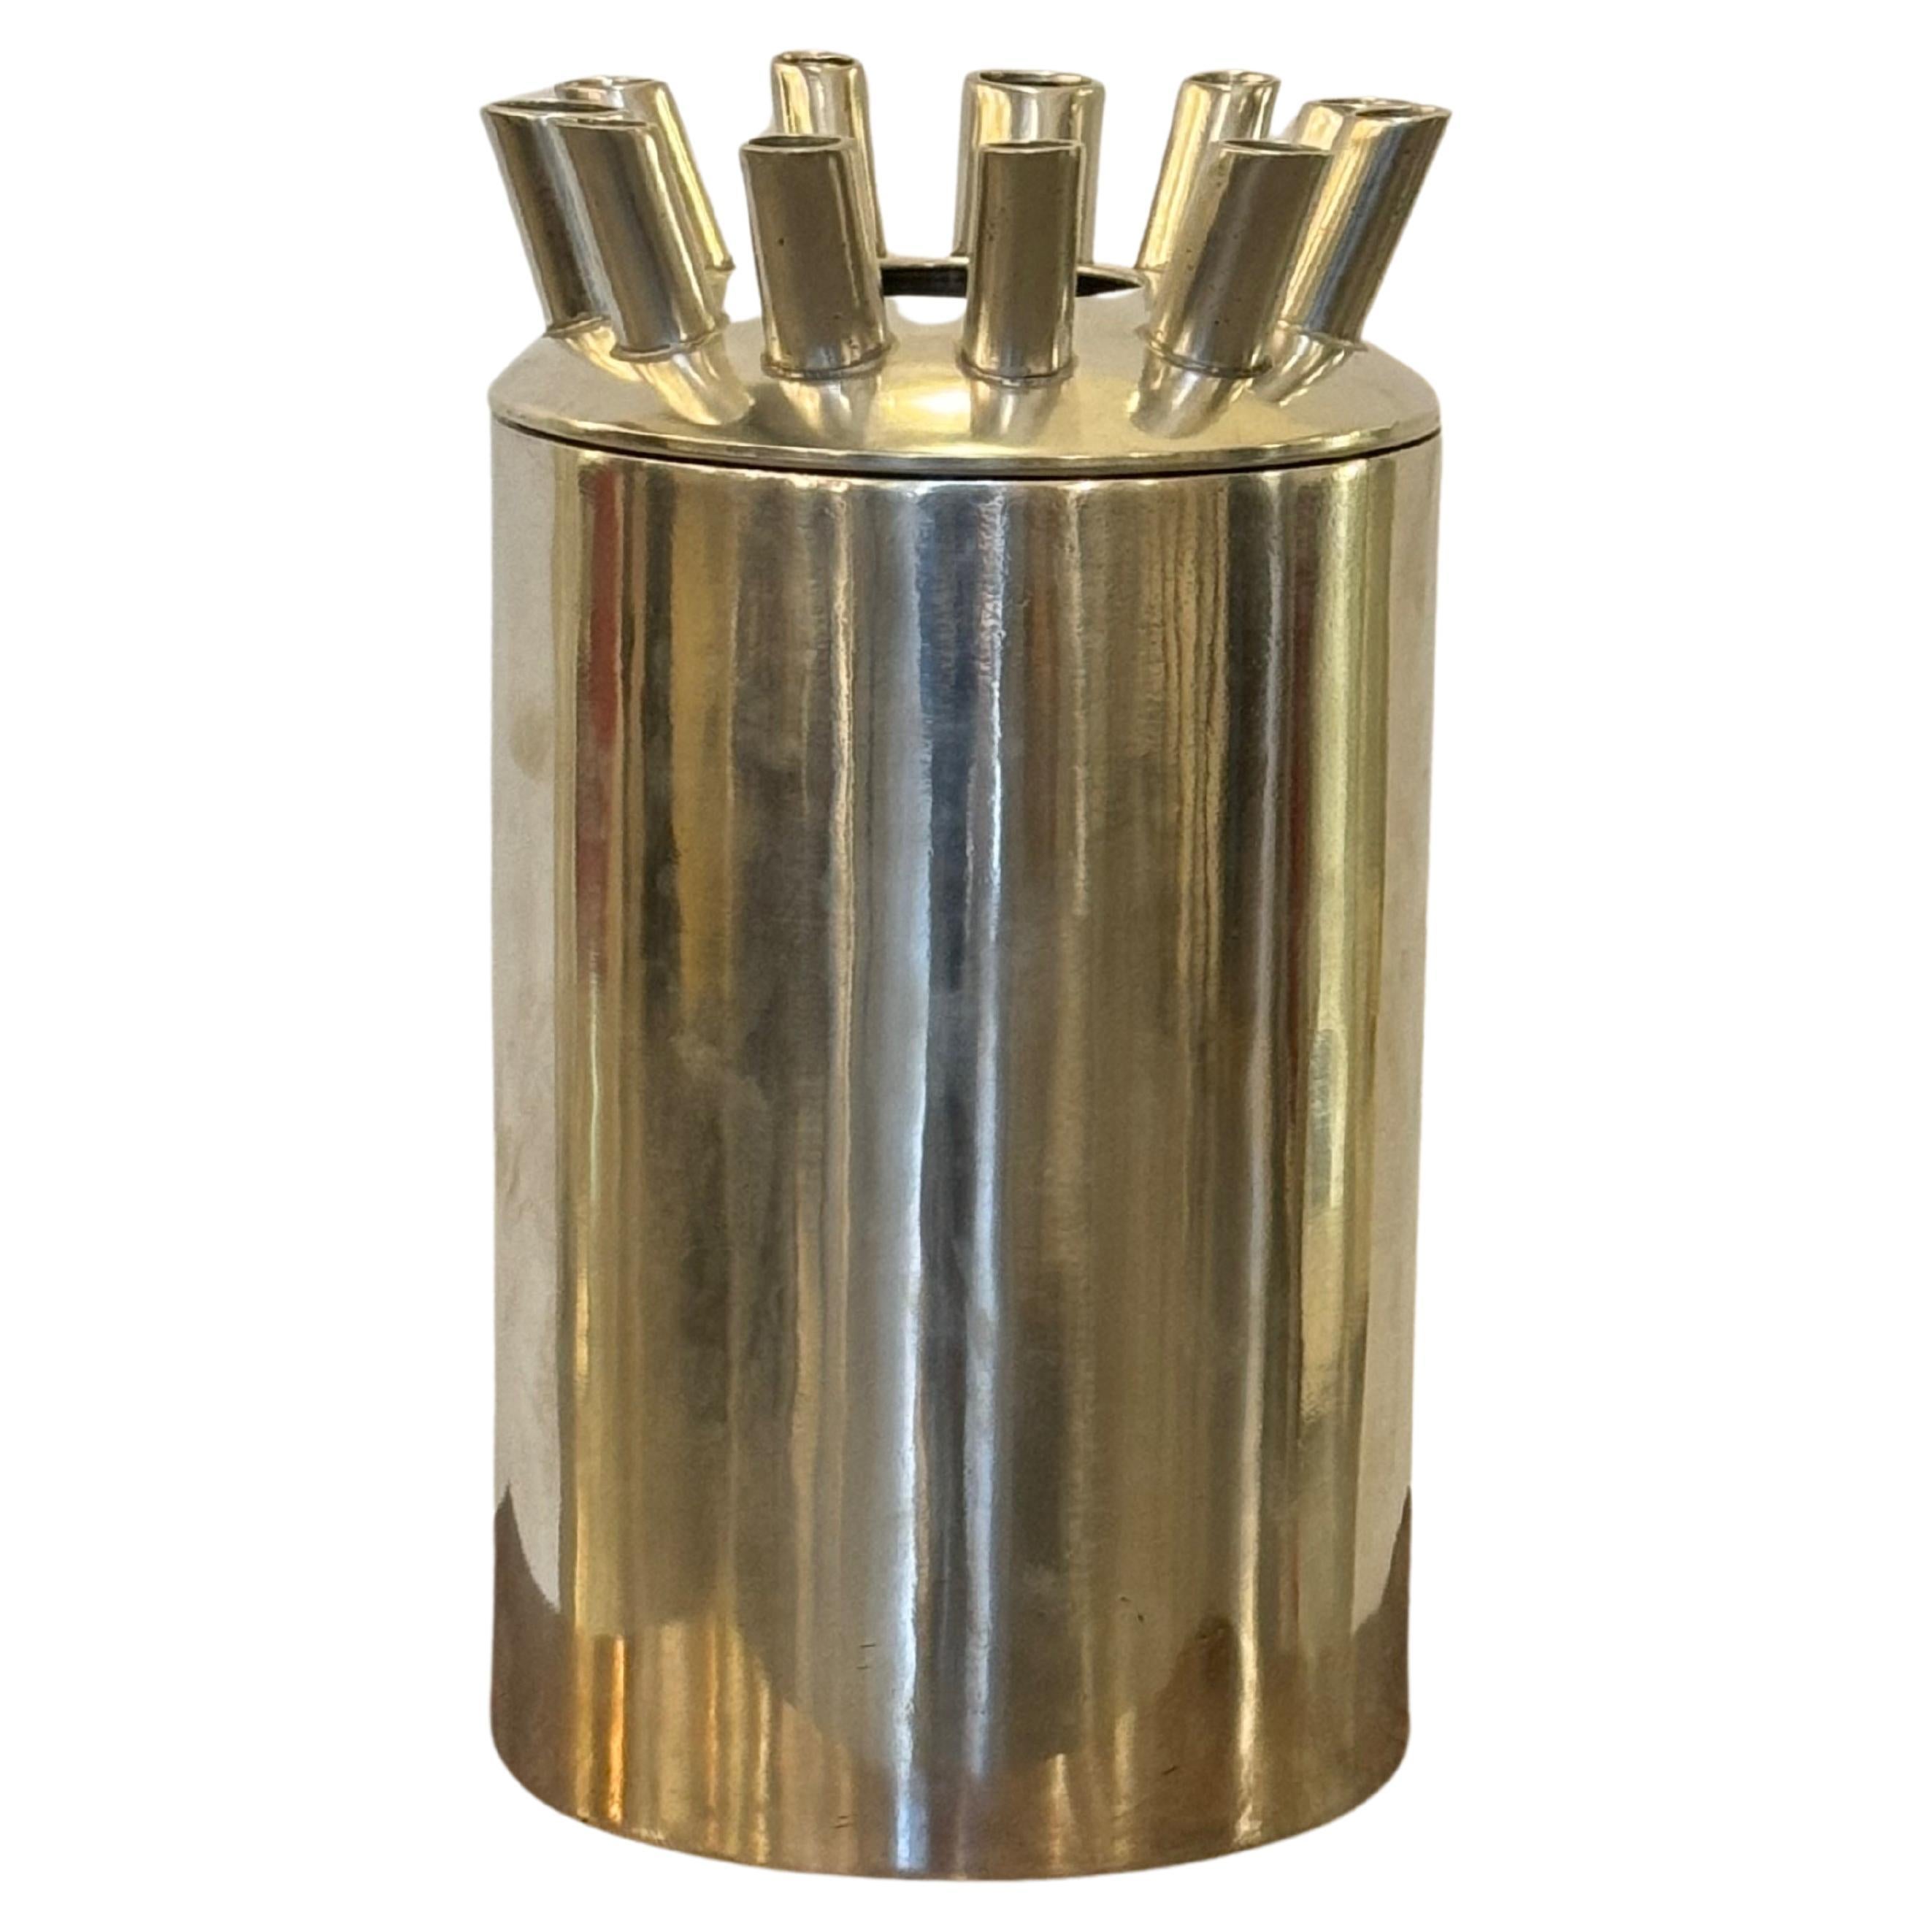 Streamlined Modernist polished Pewter sculptural vase by Mario Botta for Numa.
Artist Proof Prototype, signed by both artist and manufacturer.
This vase is a prototype of vases as featured on the 'Tredici Vasi' (13 Vases) collection.
The 'Tredici